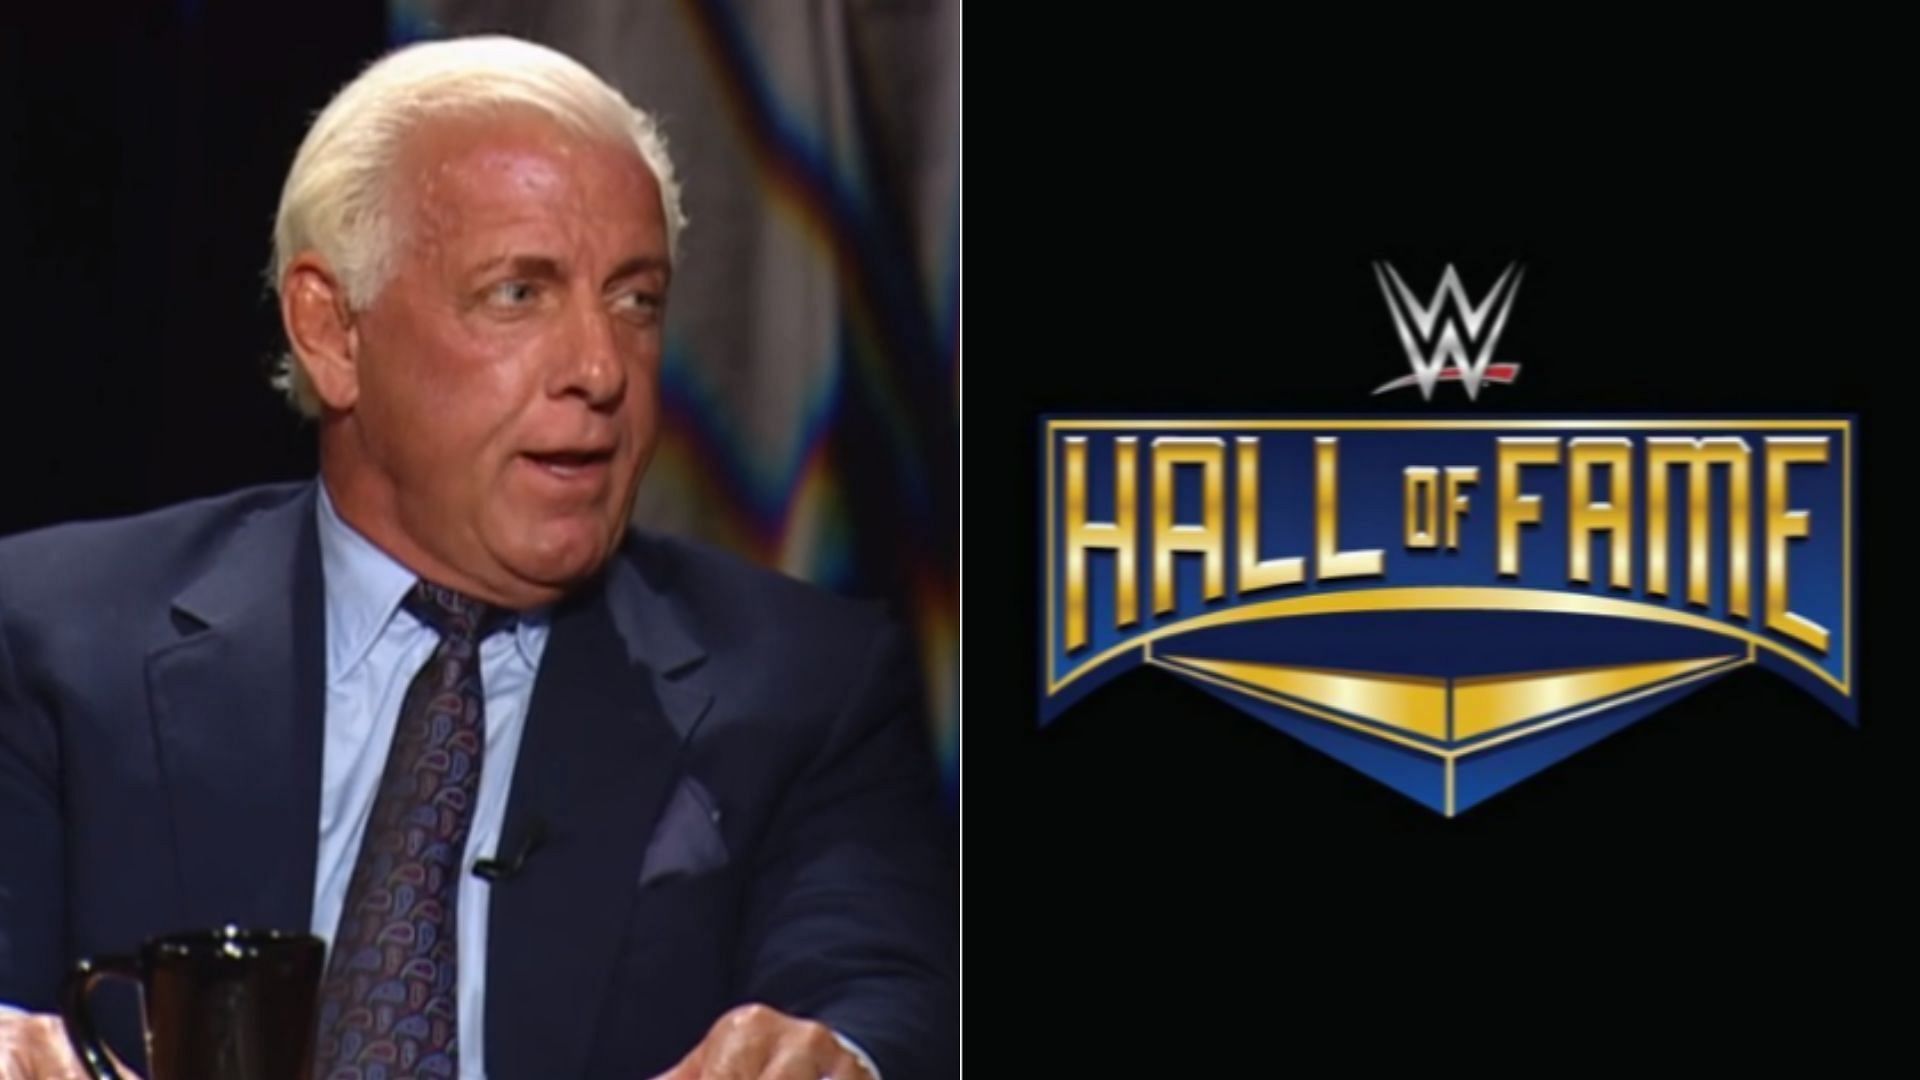 WWE icon Ric Flair is widely viewed as one of the greatest of all time.